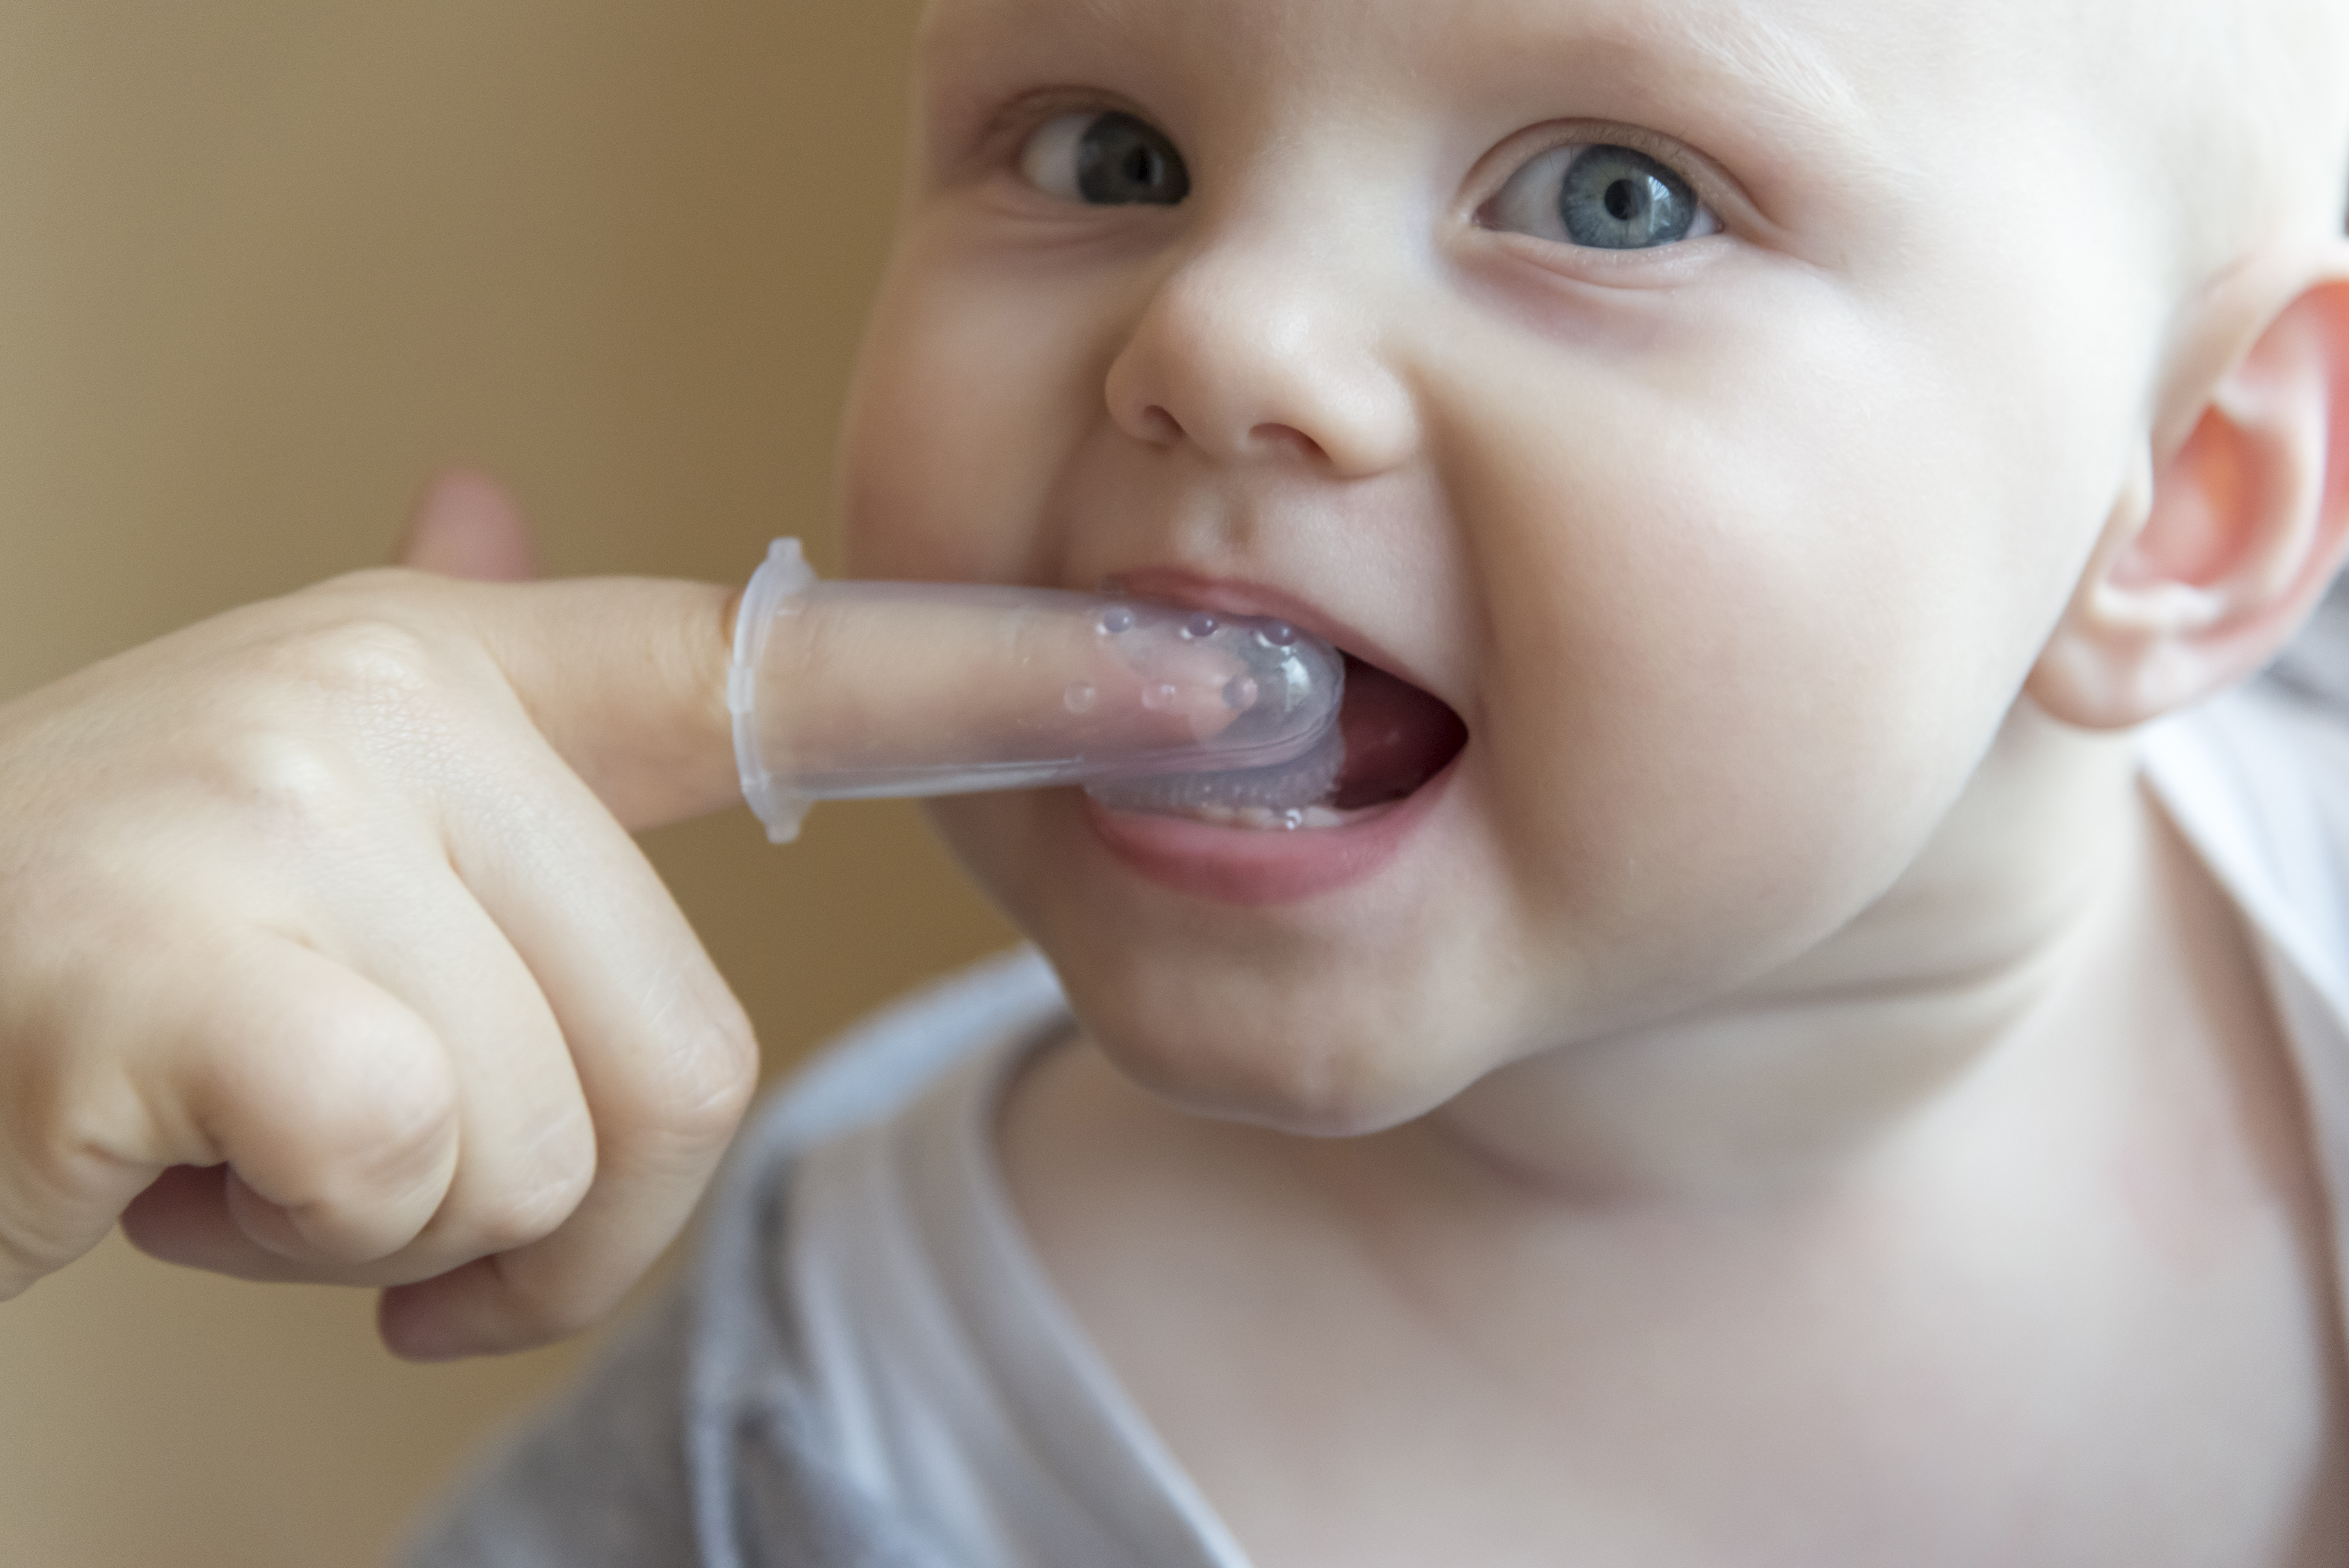 A baby’s first tooth should be greeted with a soft infant toothbrush that you use for a gentle cleansing after each meal. 